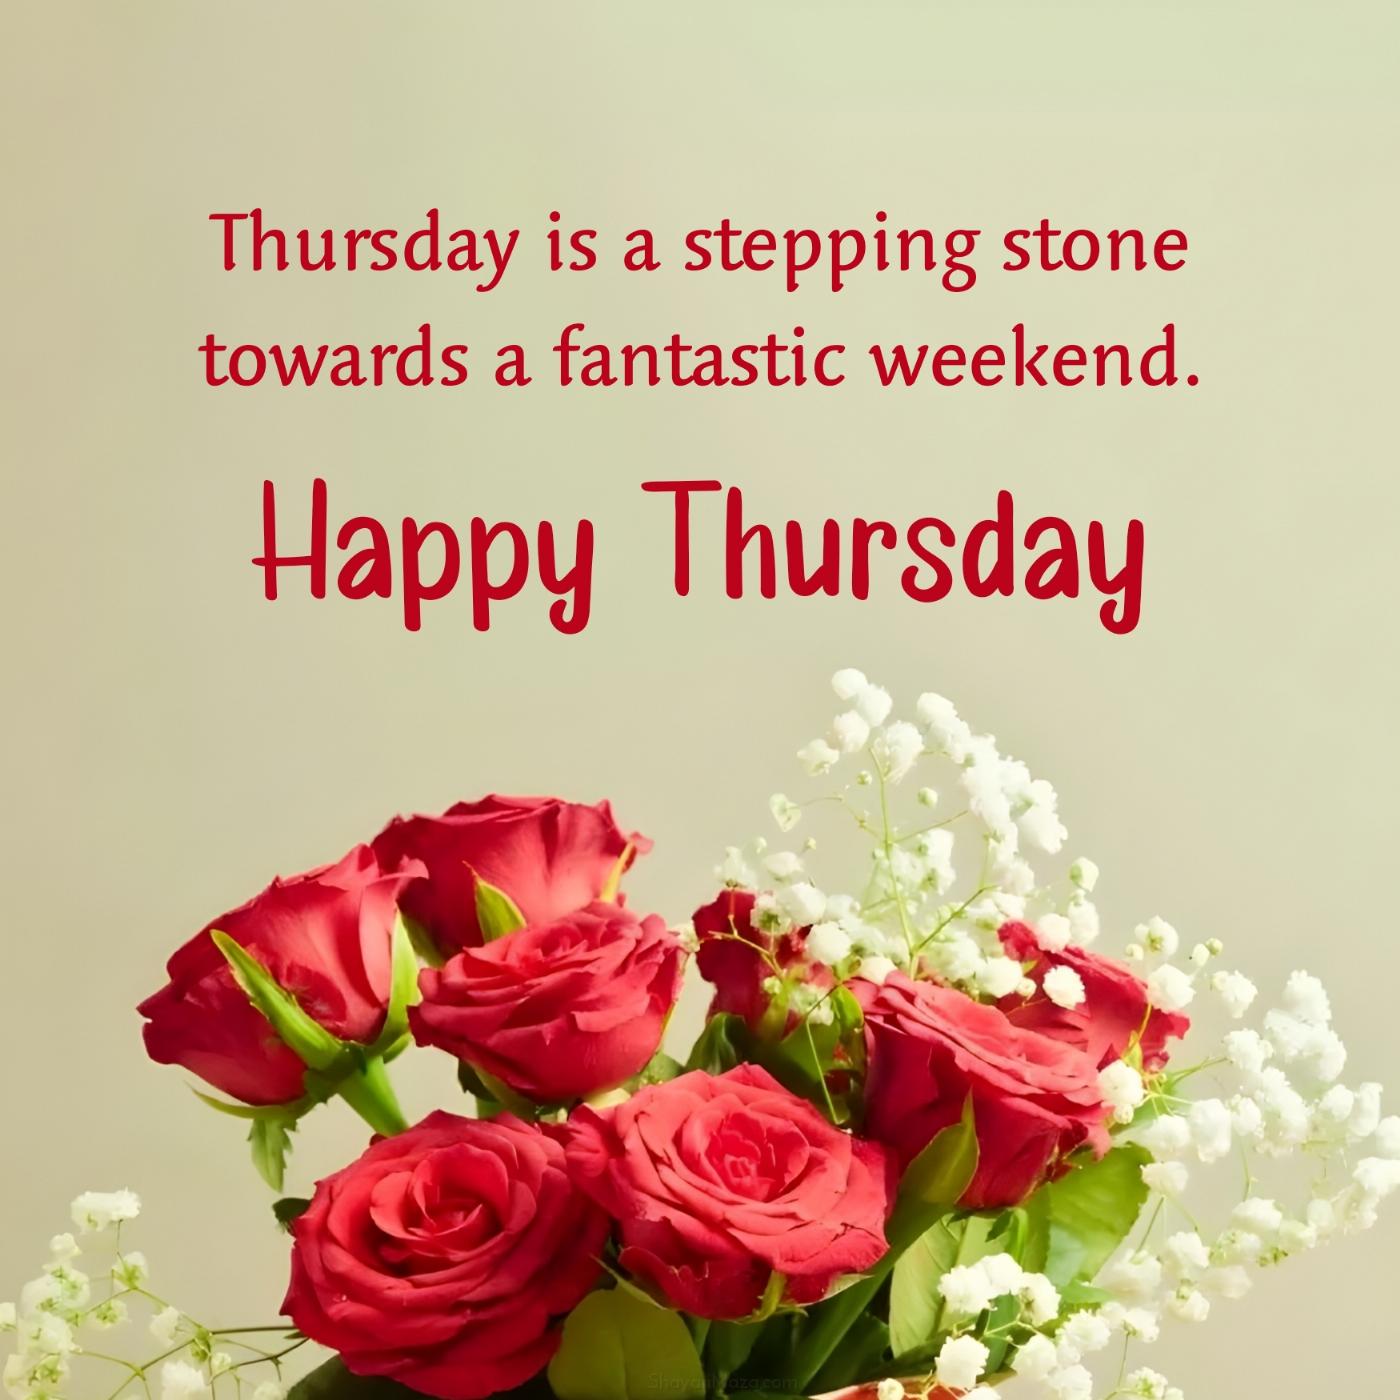 Thursday is a stepping stone towards a fantastic weekend